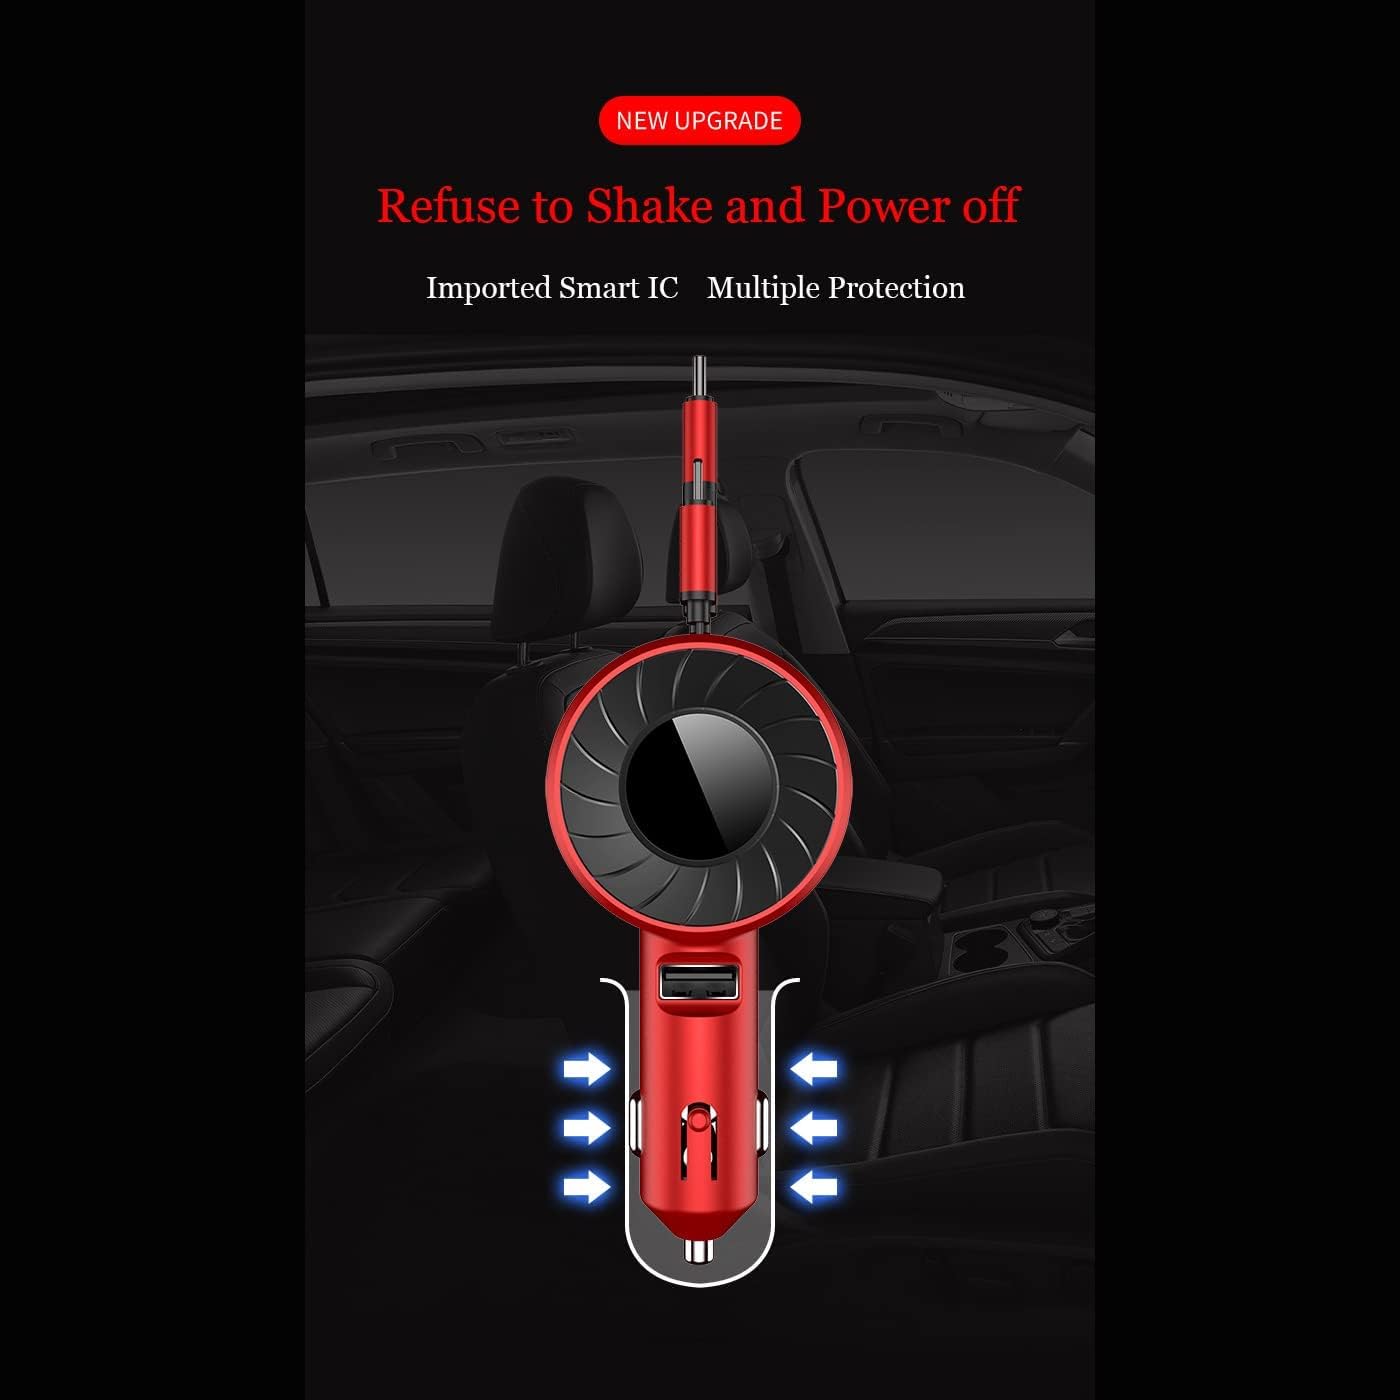 3-in-1 Retractable Cable Multi-Charging Car Charger Adapter with anti-shake design and power-off feature